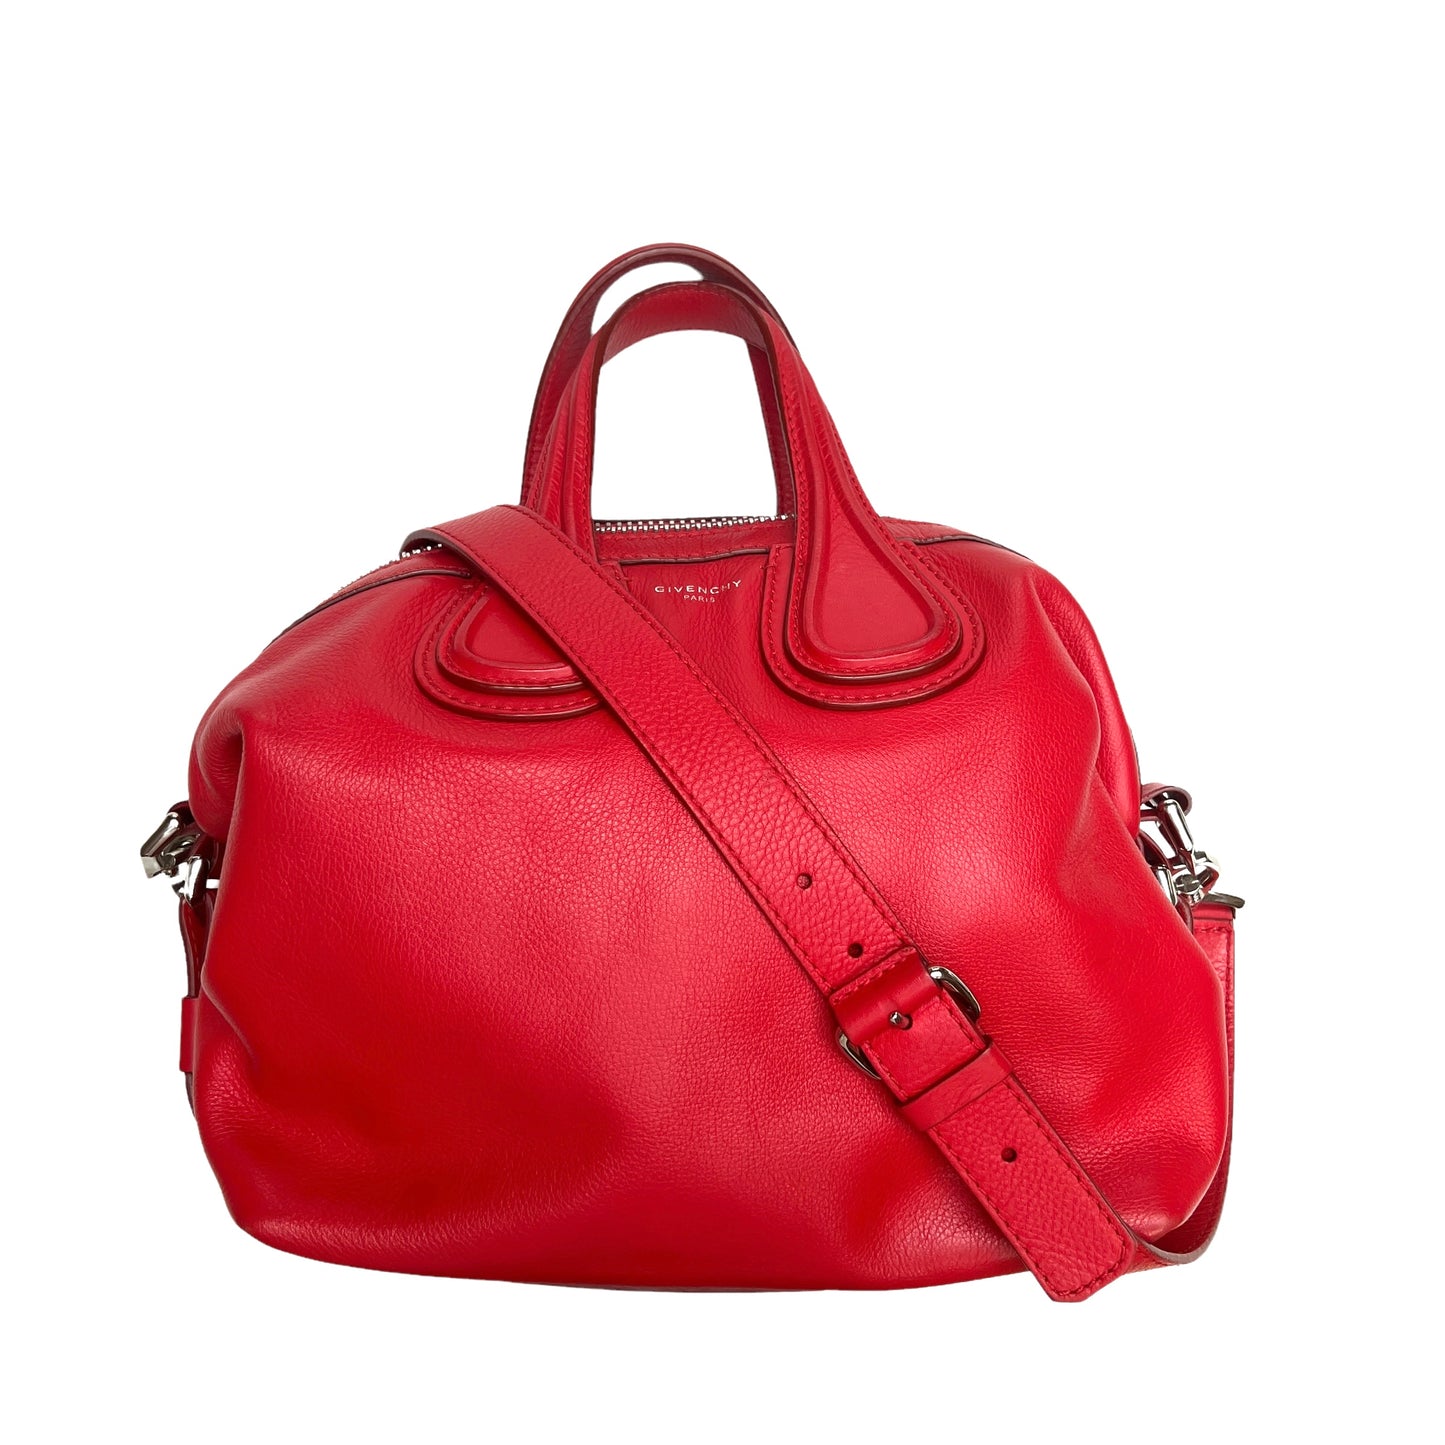 Nightingale Small Red Leather Bag